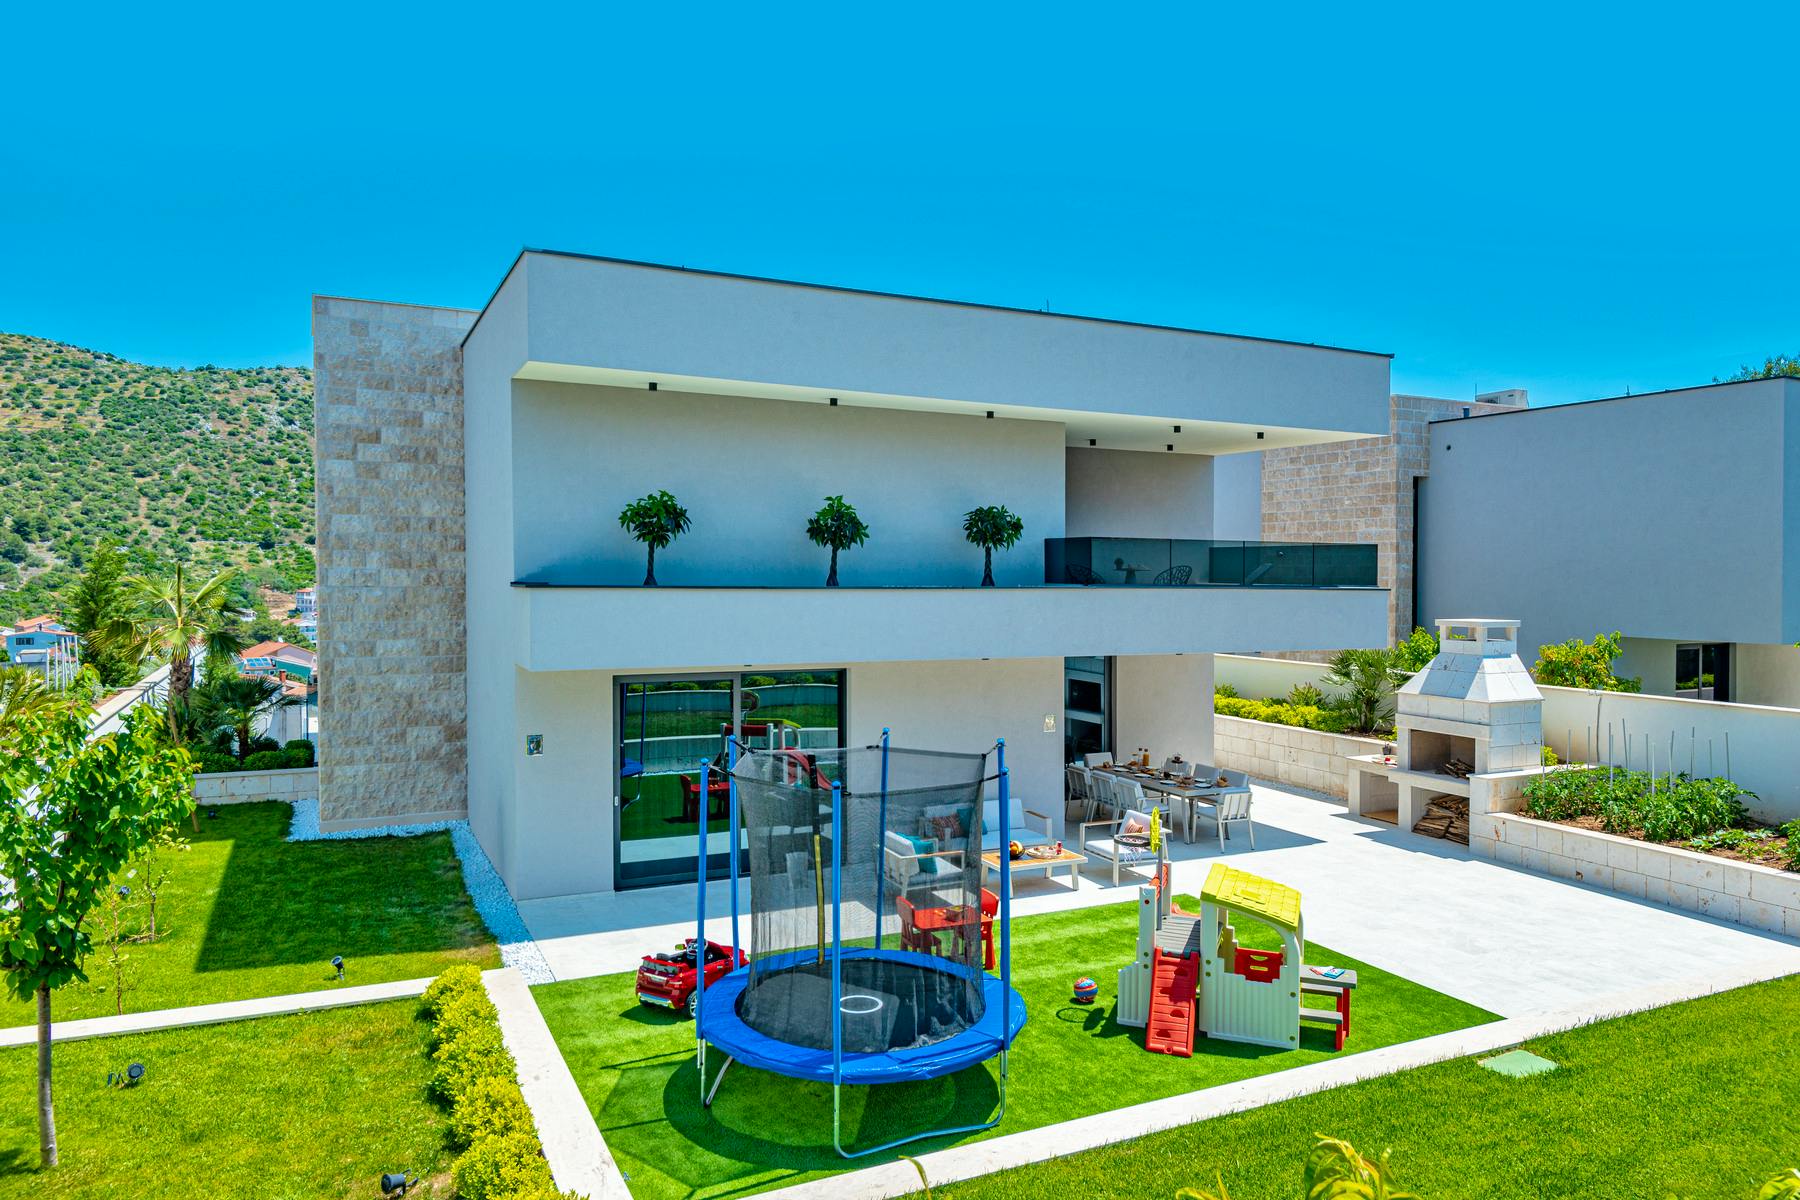 Outdoor terrace with children's play zone